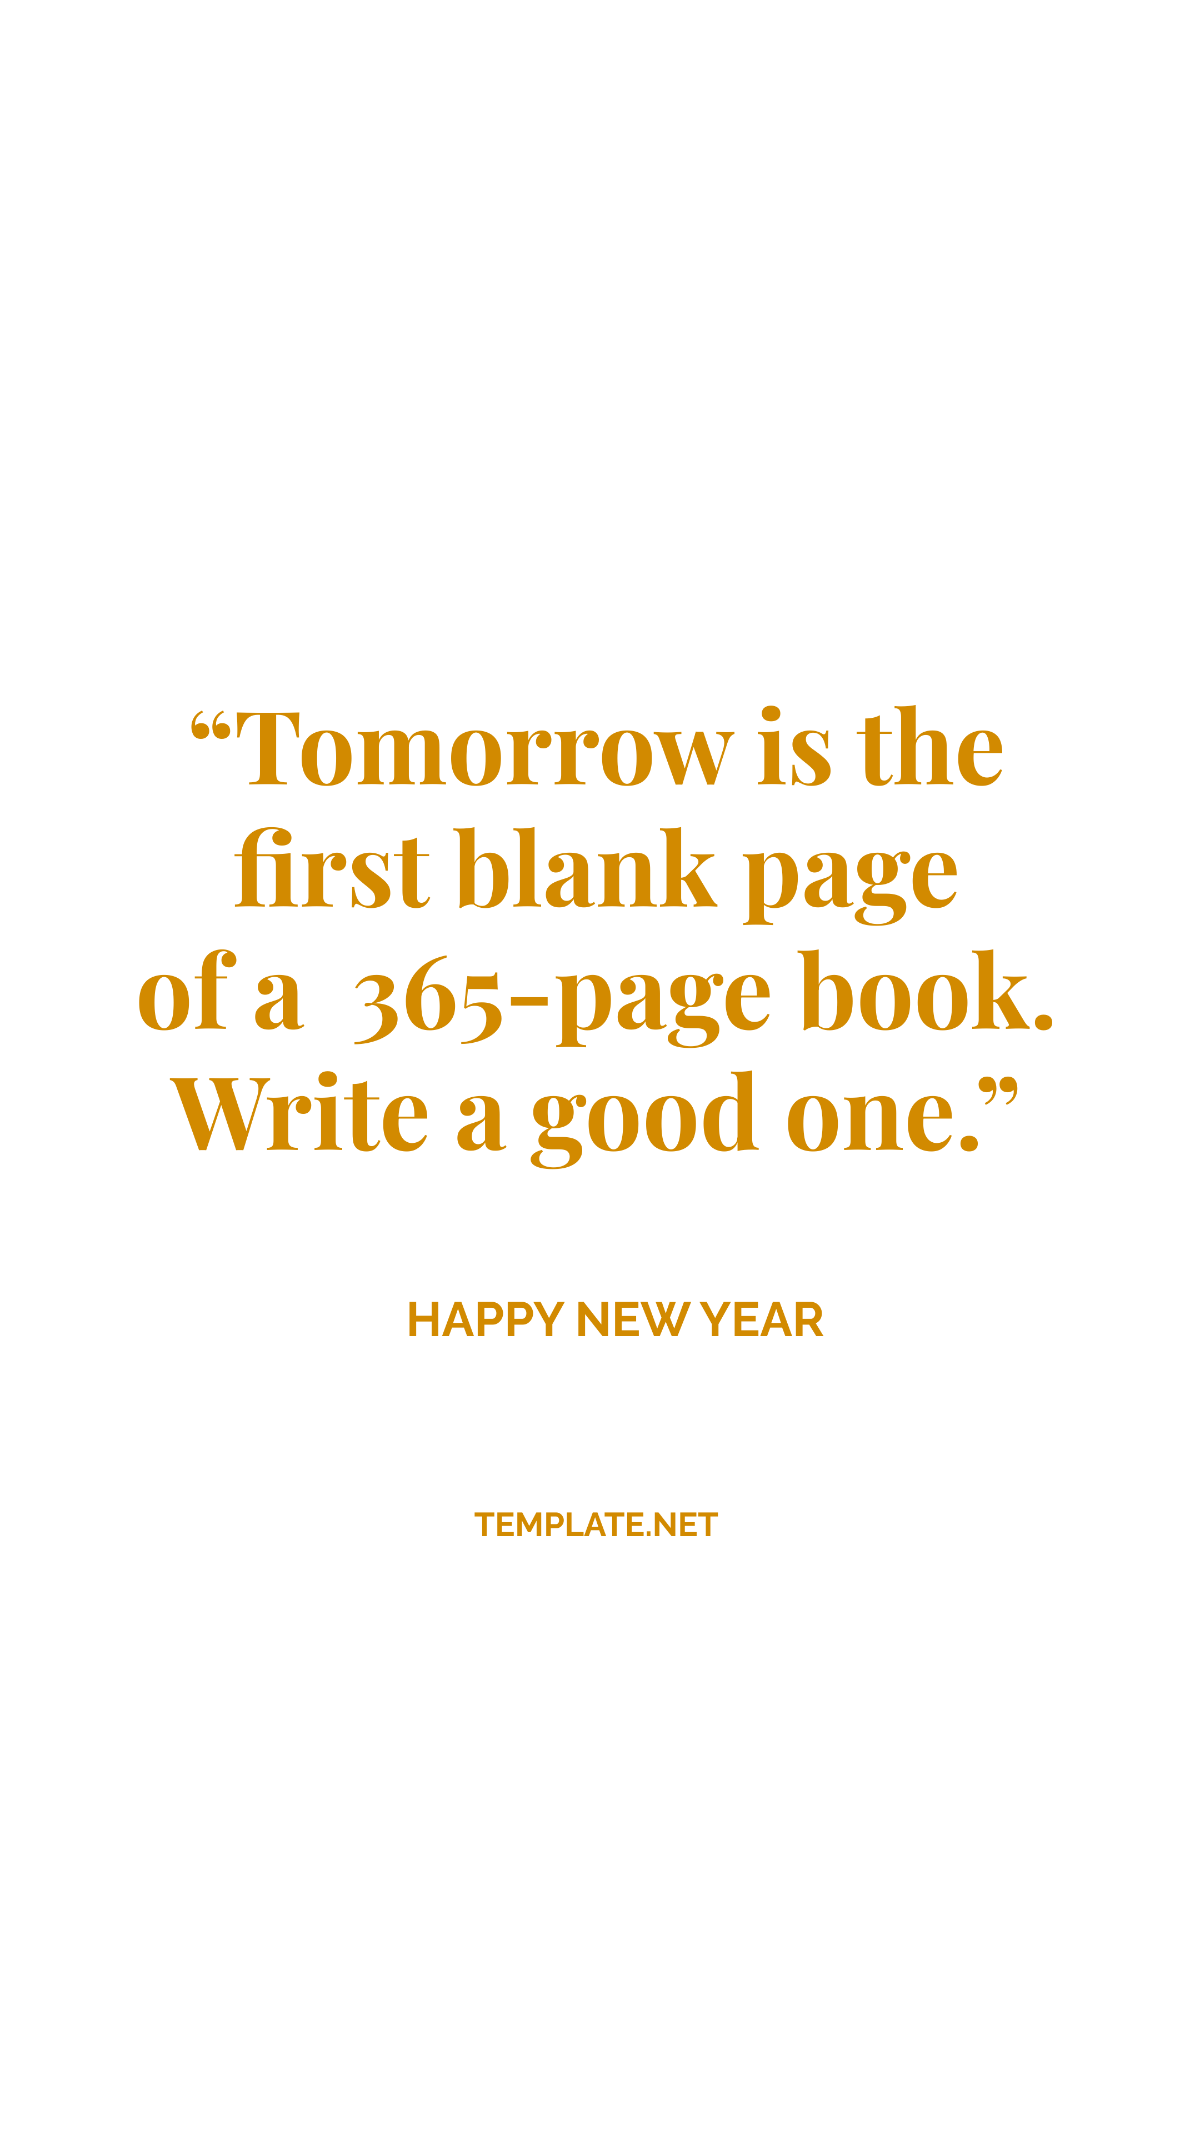 Free Happy New Year Quote Template